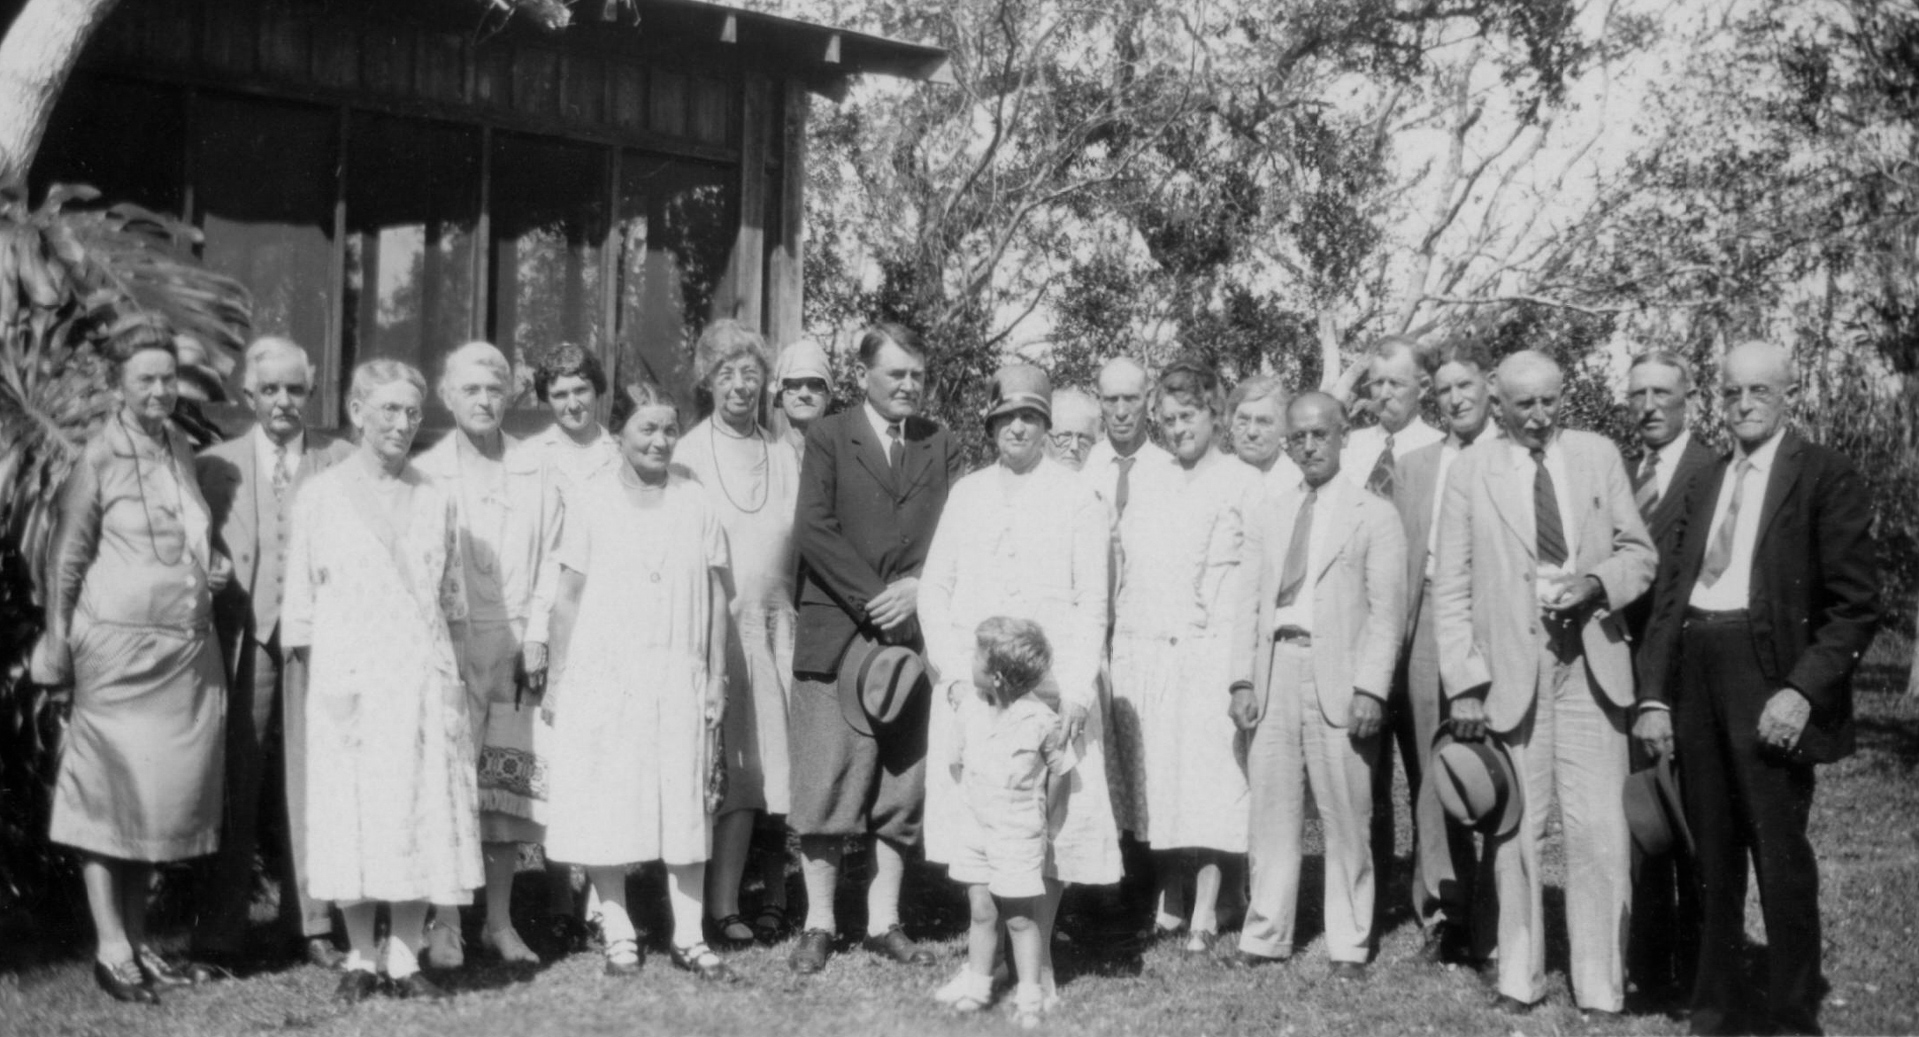 Party for Dr. and Mrs. Ashley at the "Hammicks" in Florida City - about 1928-2929